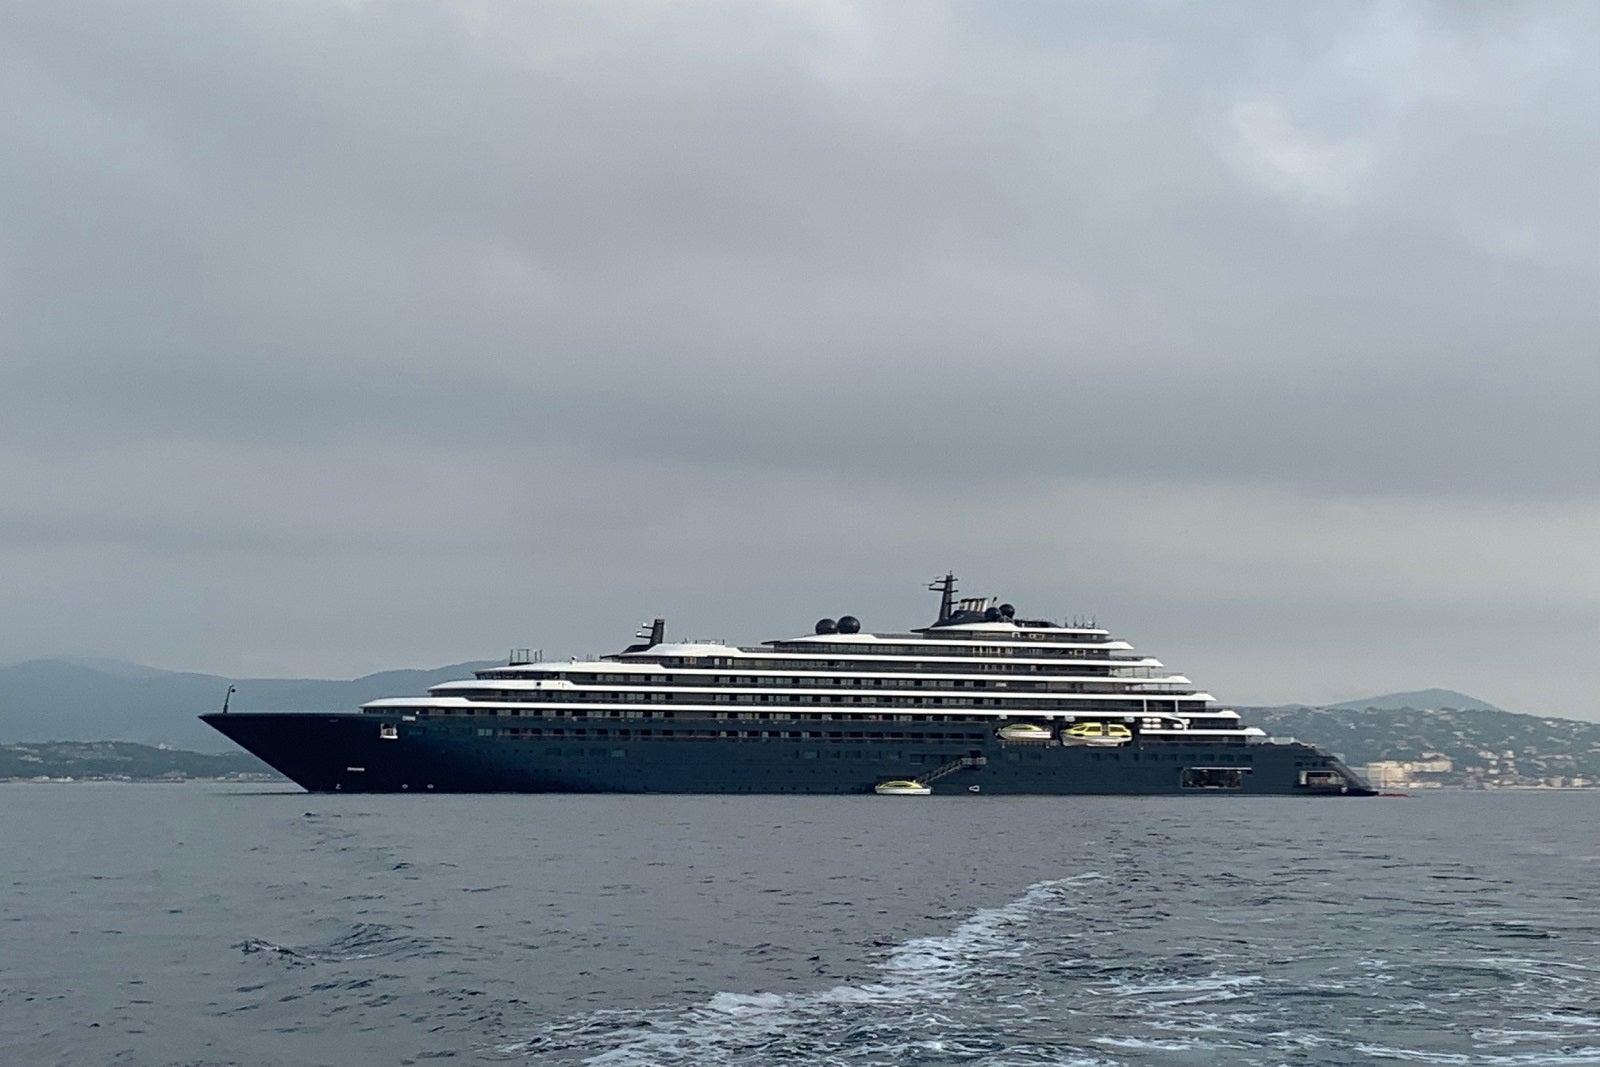 Ritz-Carlton Yacht Collection's Evrima delayed again, to Aug. 6